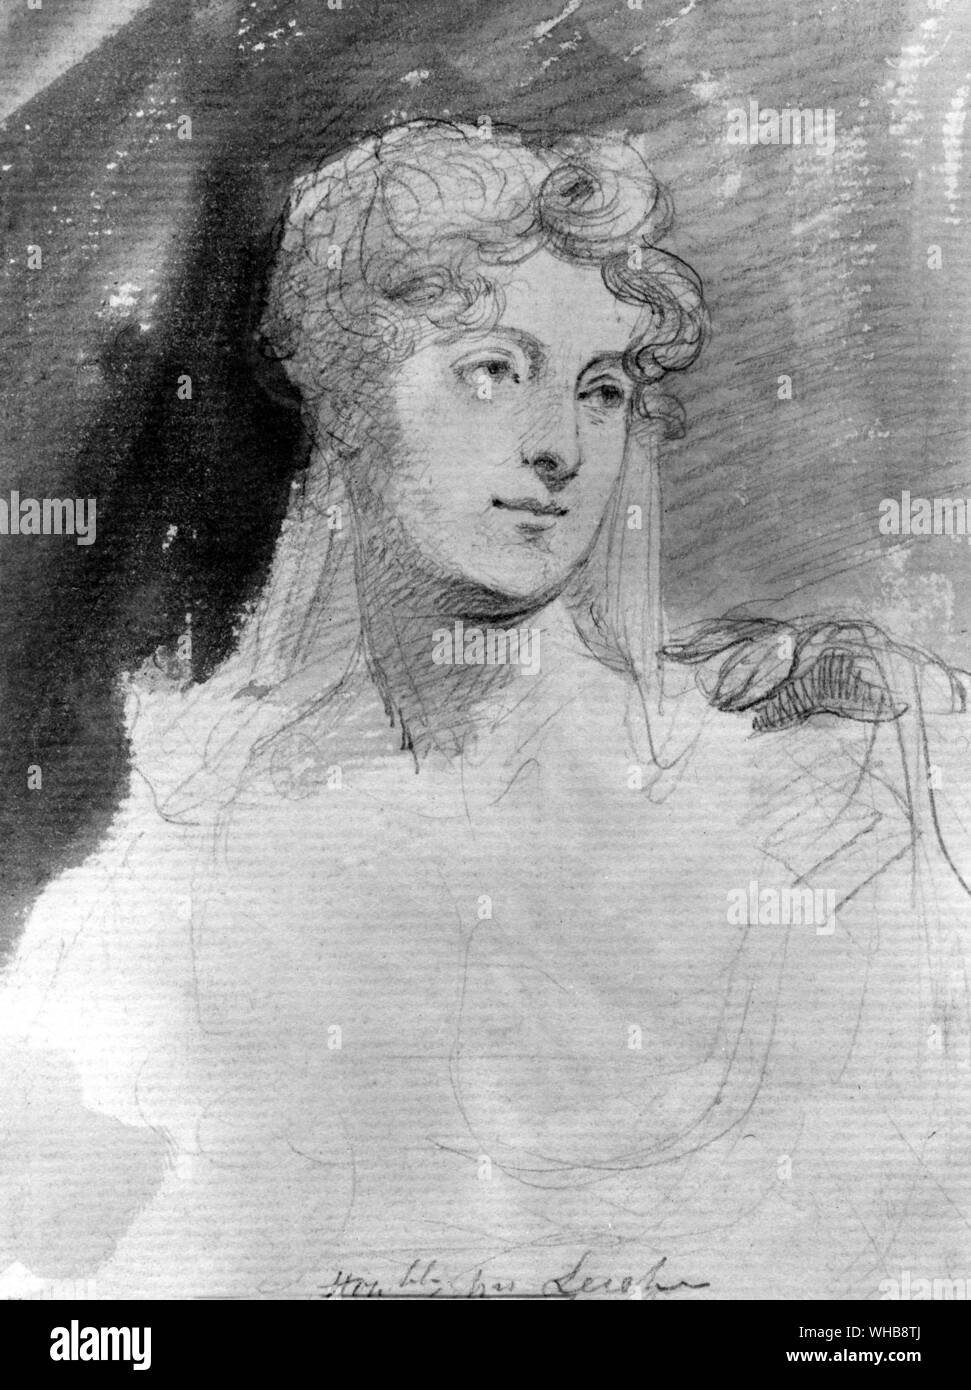 Augusta Leigh, by Sir George Hayter in pencil and indian ink - The Brtish Museum, London (J. B. Freeman) - The Honourable Augusta Byron, later The Honourable Augusta Leigh (January 26, 1783 - October 12, 1851), was the only daughter of John Mad Jack Byron, the poet Lord Byron's father, by his first wife.. Stock Photo